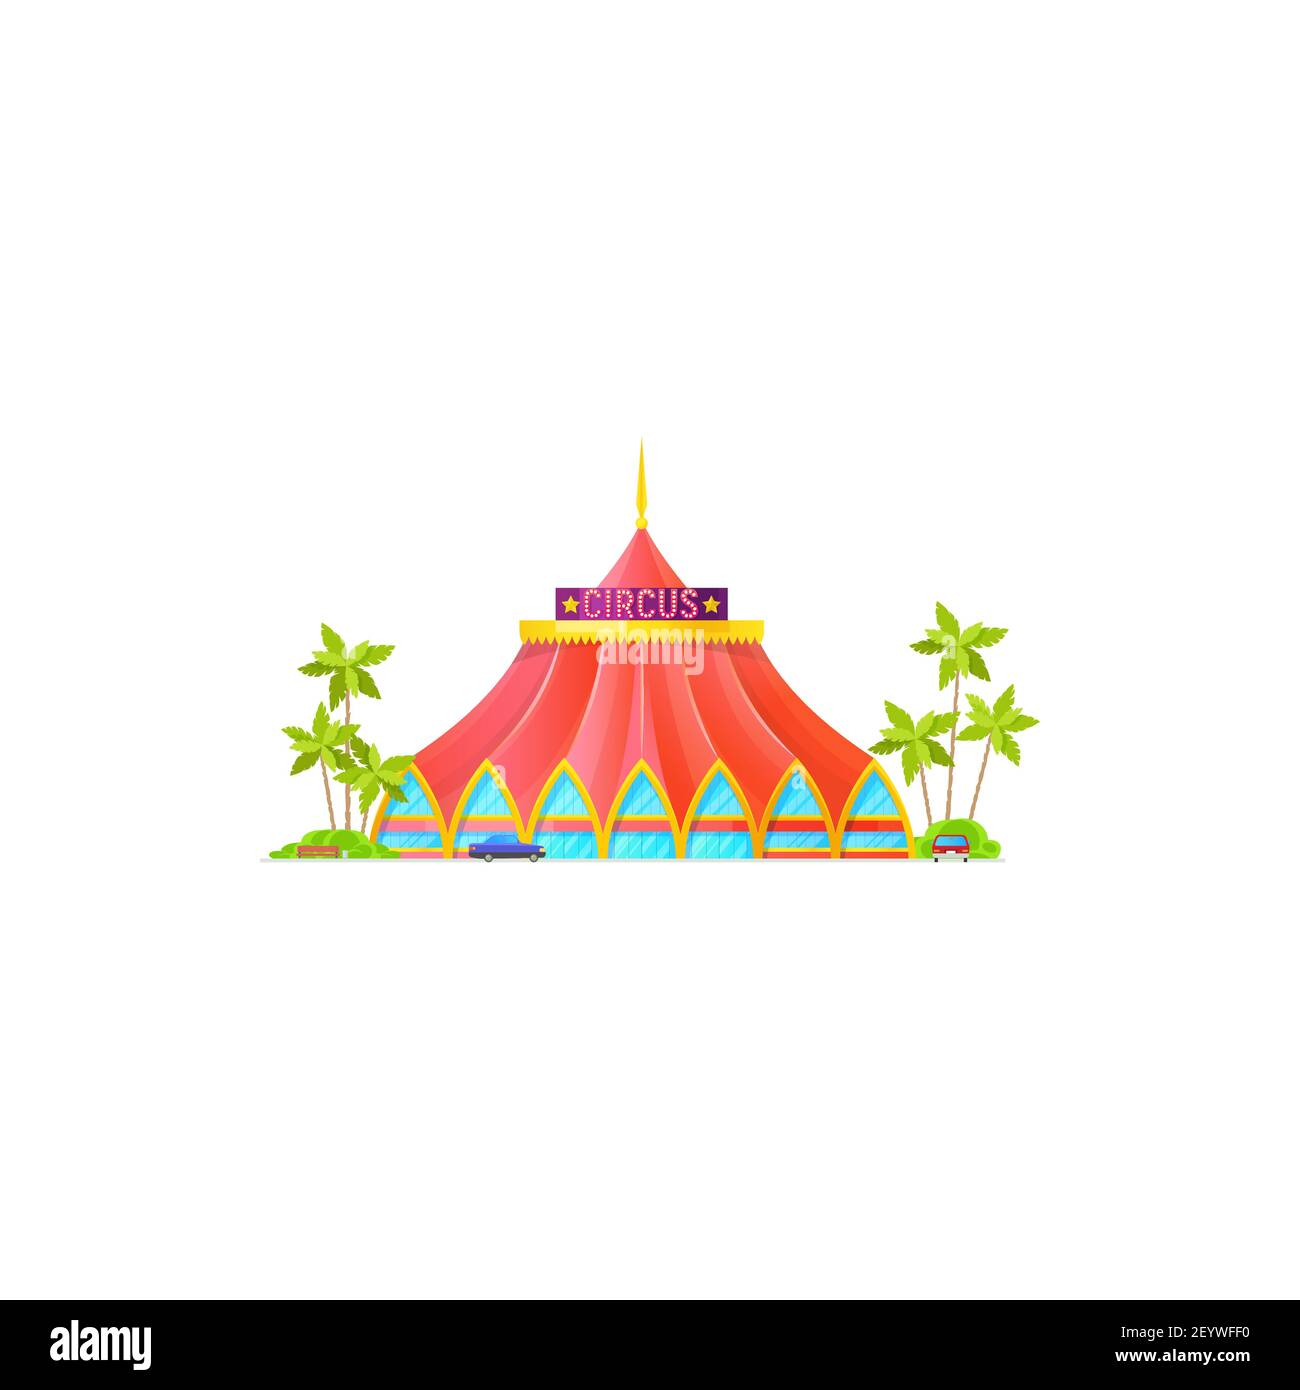 Circus tent isolated entertainment building exterior design. Vector facade of big top circus, parking zone with parks or vehicles, palm trees. Red mar Stock Vector